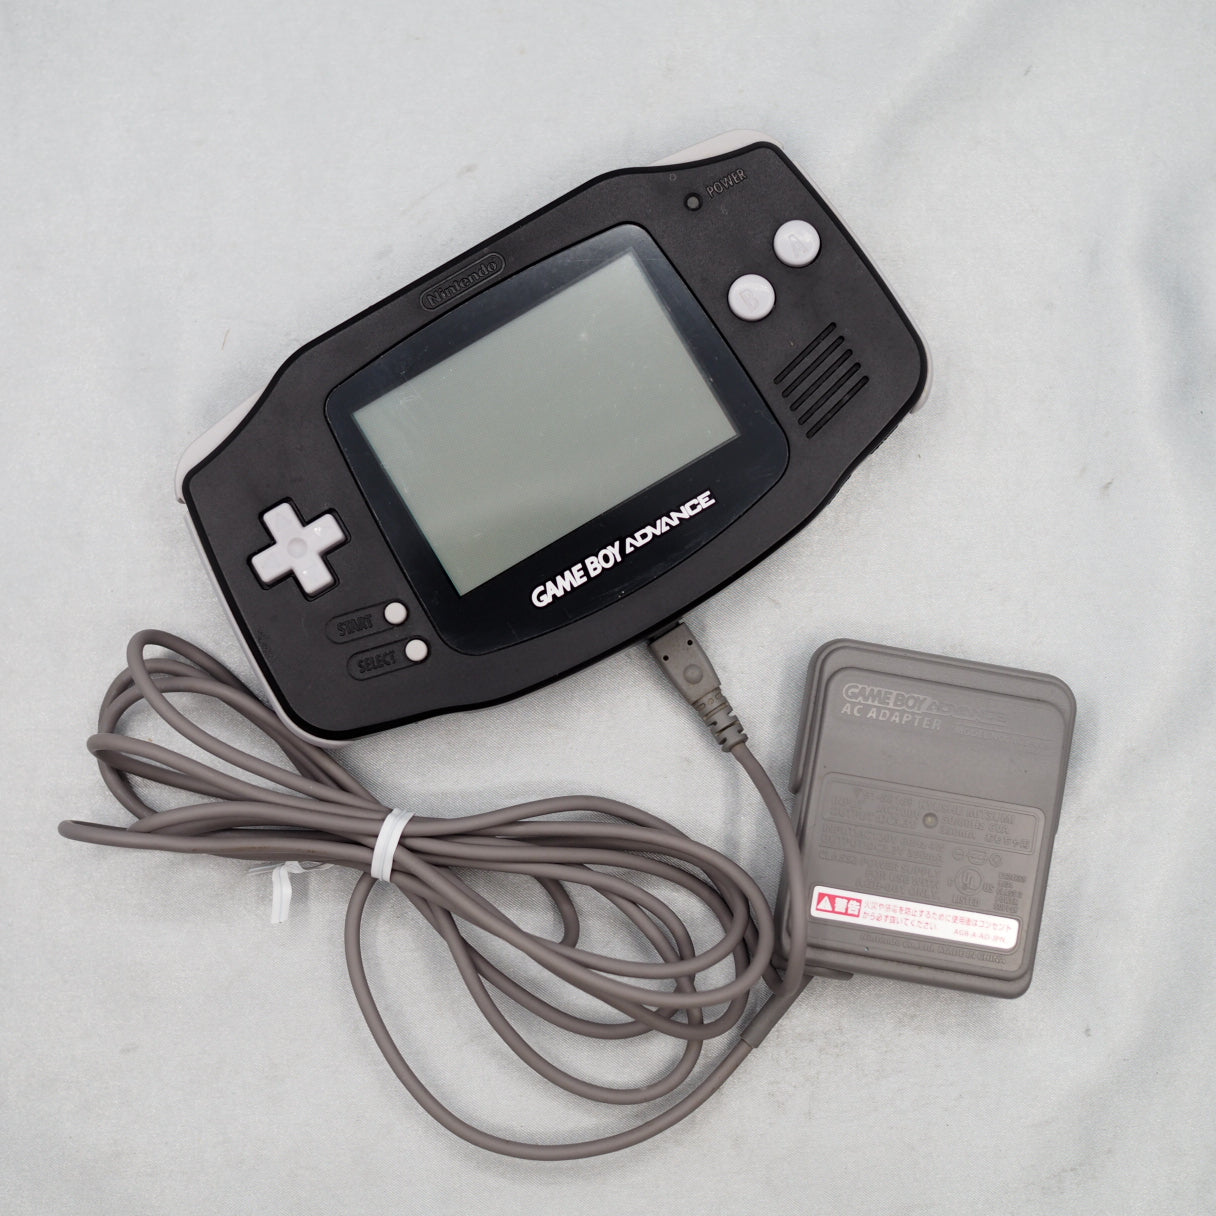 Nintendo Game Boy Advance [Black] + AC Power Adapter Charger [AGB-008] [AGB-009]